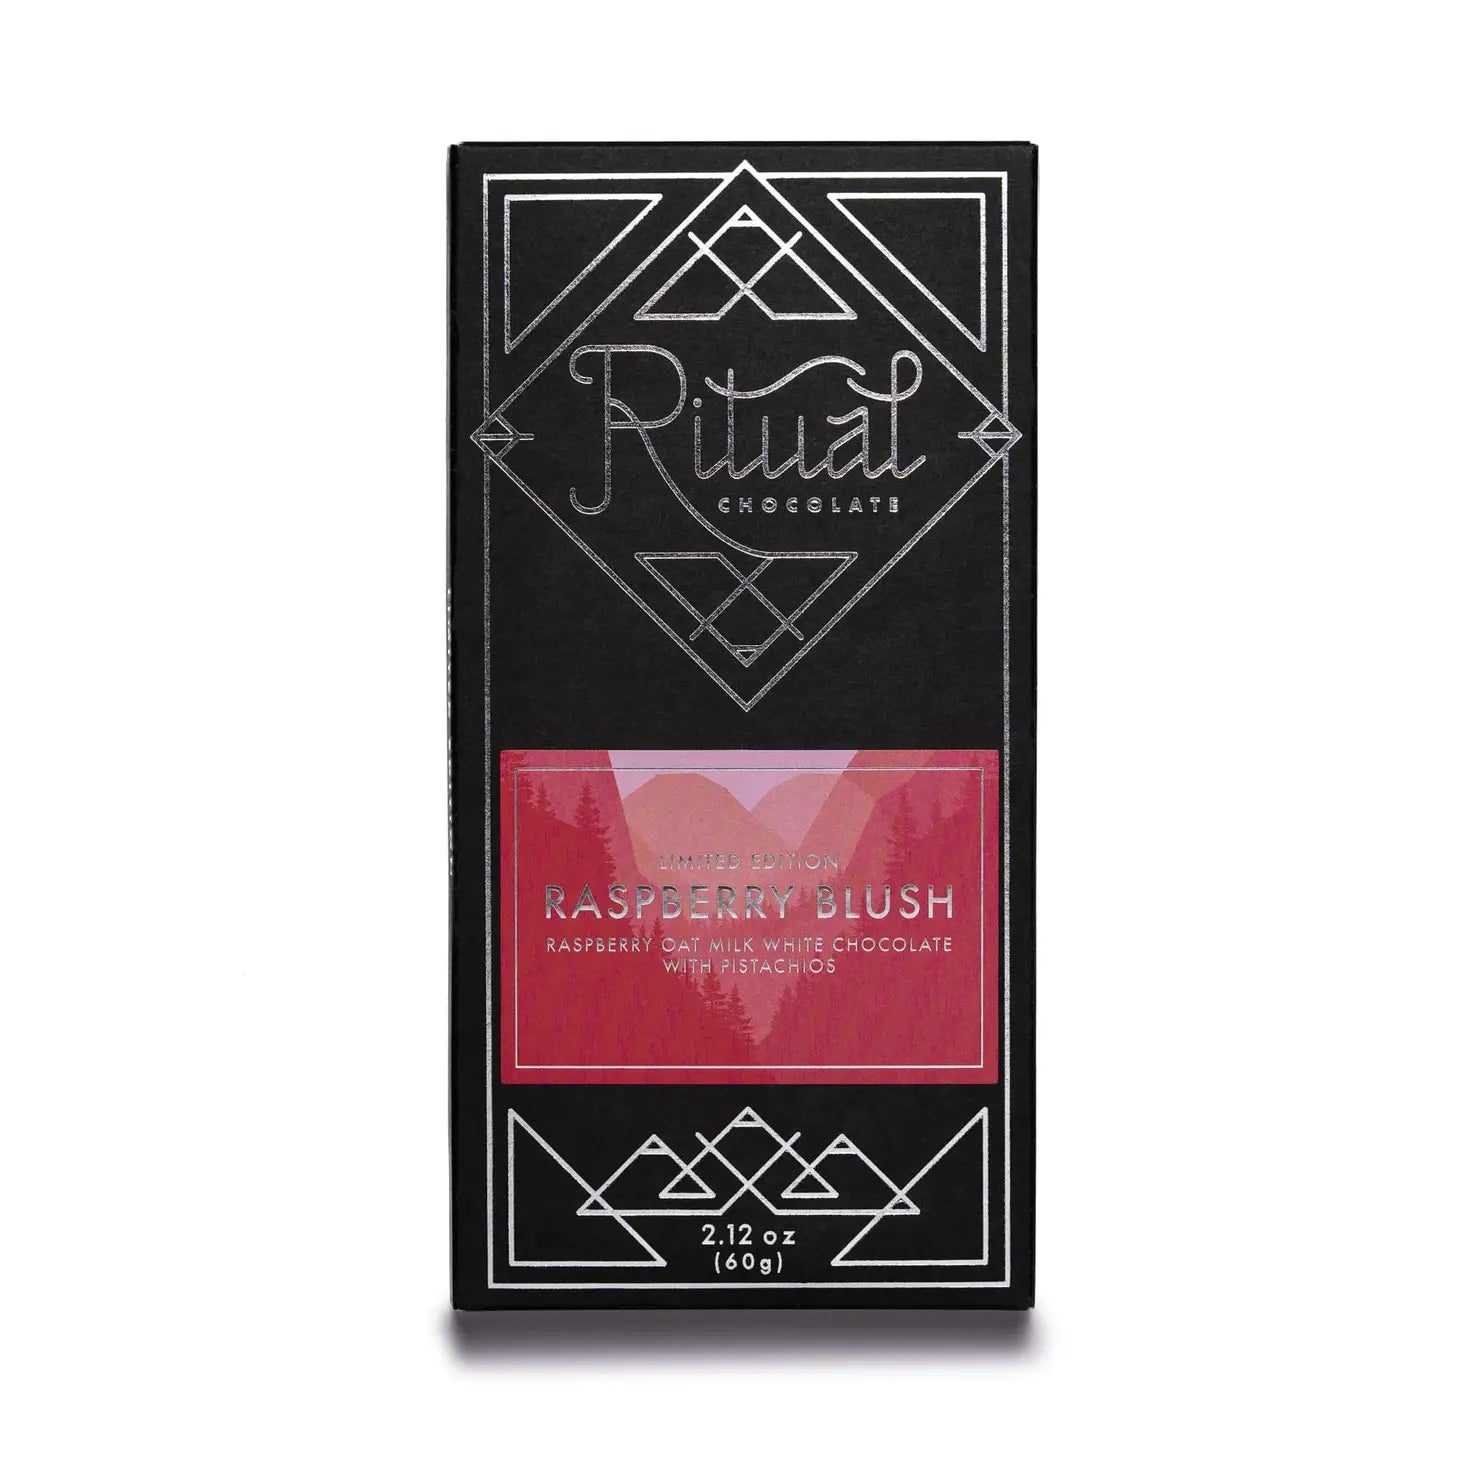 Raspberry Oat Milk White Chocolate with Pistachios by Ritual Chocolate. Valentines Day Chocolate. Gourmet valentines chocolate bar. Chocolate for valentines day. vegan chocolate. vegan gourmet chocolate. raspberry chocolate bar. oat milk chocolate bar. valentines gift. 